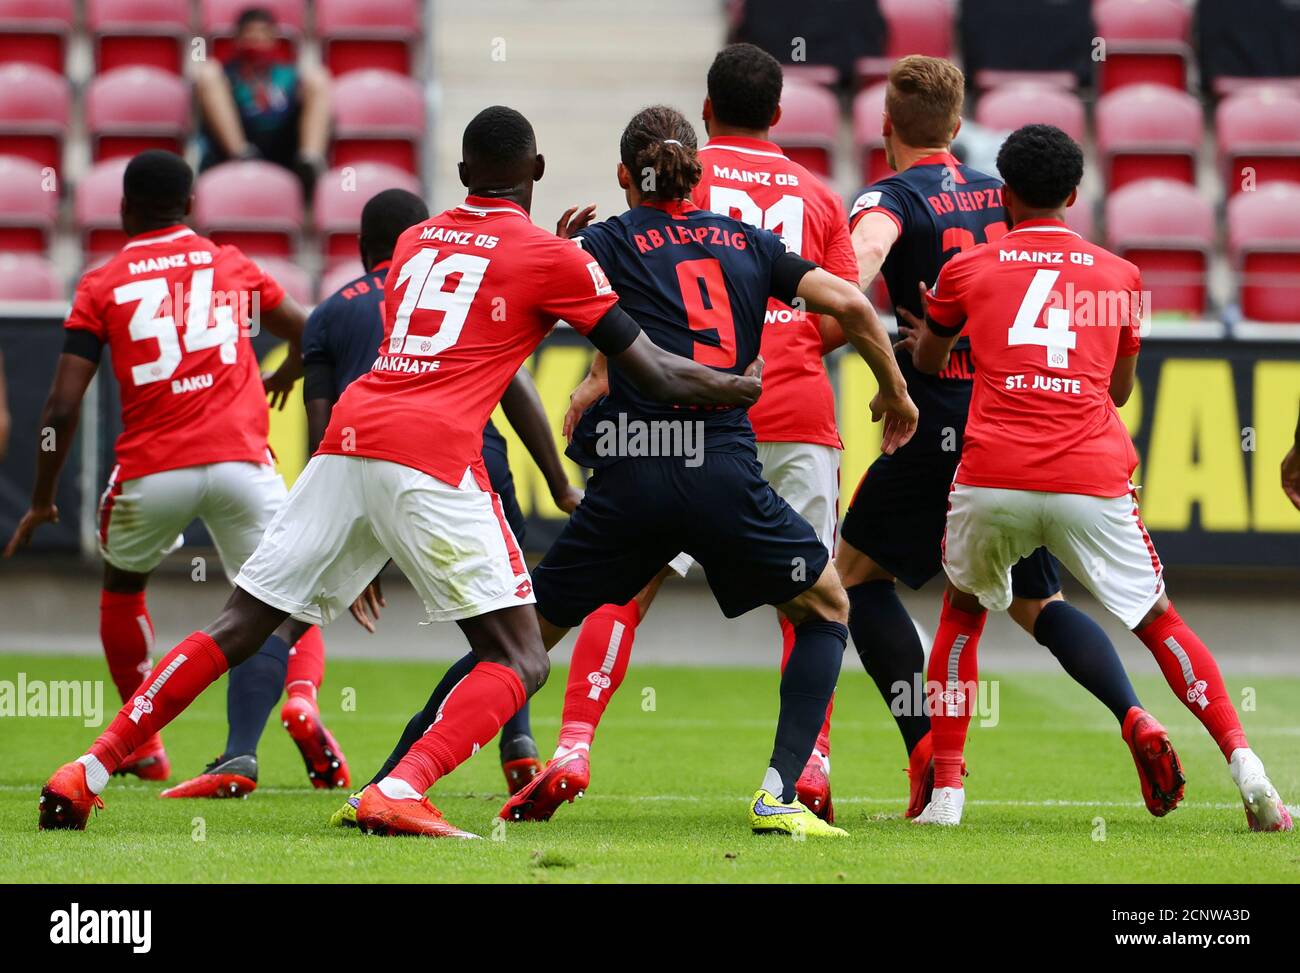 Soccer Football - Bundesliga - 1. FSV Mainz 05 v RB Leipzig - Opel Arena, Mainz, Germany - May 24, 2020  Players in action during a corner kick, as play resumes behind closed doors following the outbreak of the coronavirus disease (COVID-19) REUTERS/Kai Pfaffenbach/Pool  DFL regulations prohibit any use of photographs as image sequences and/or quasi-video Stock Photo